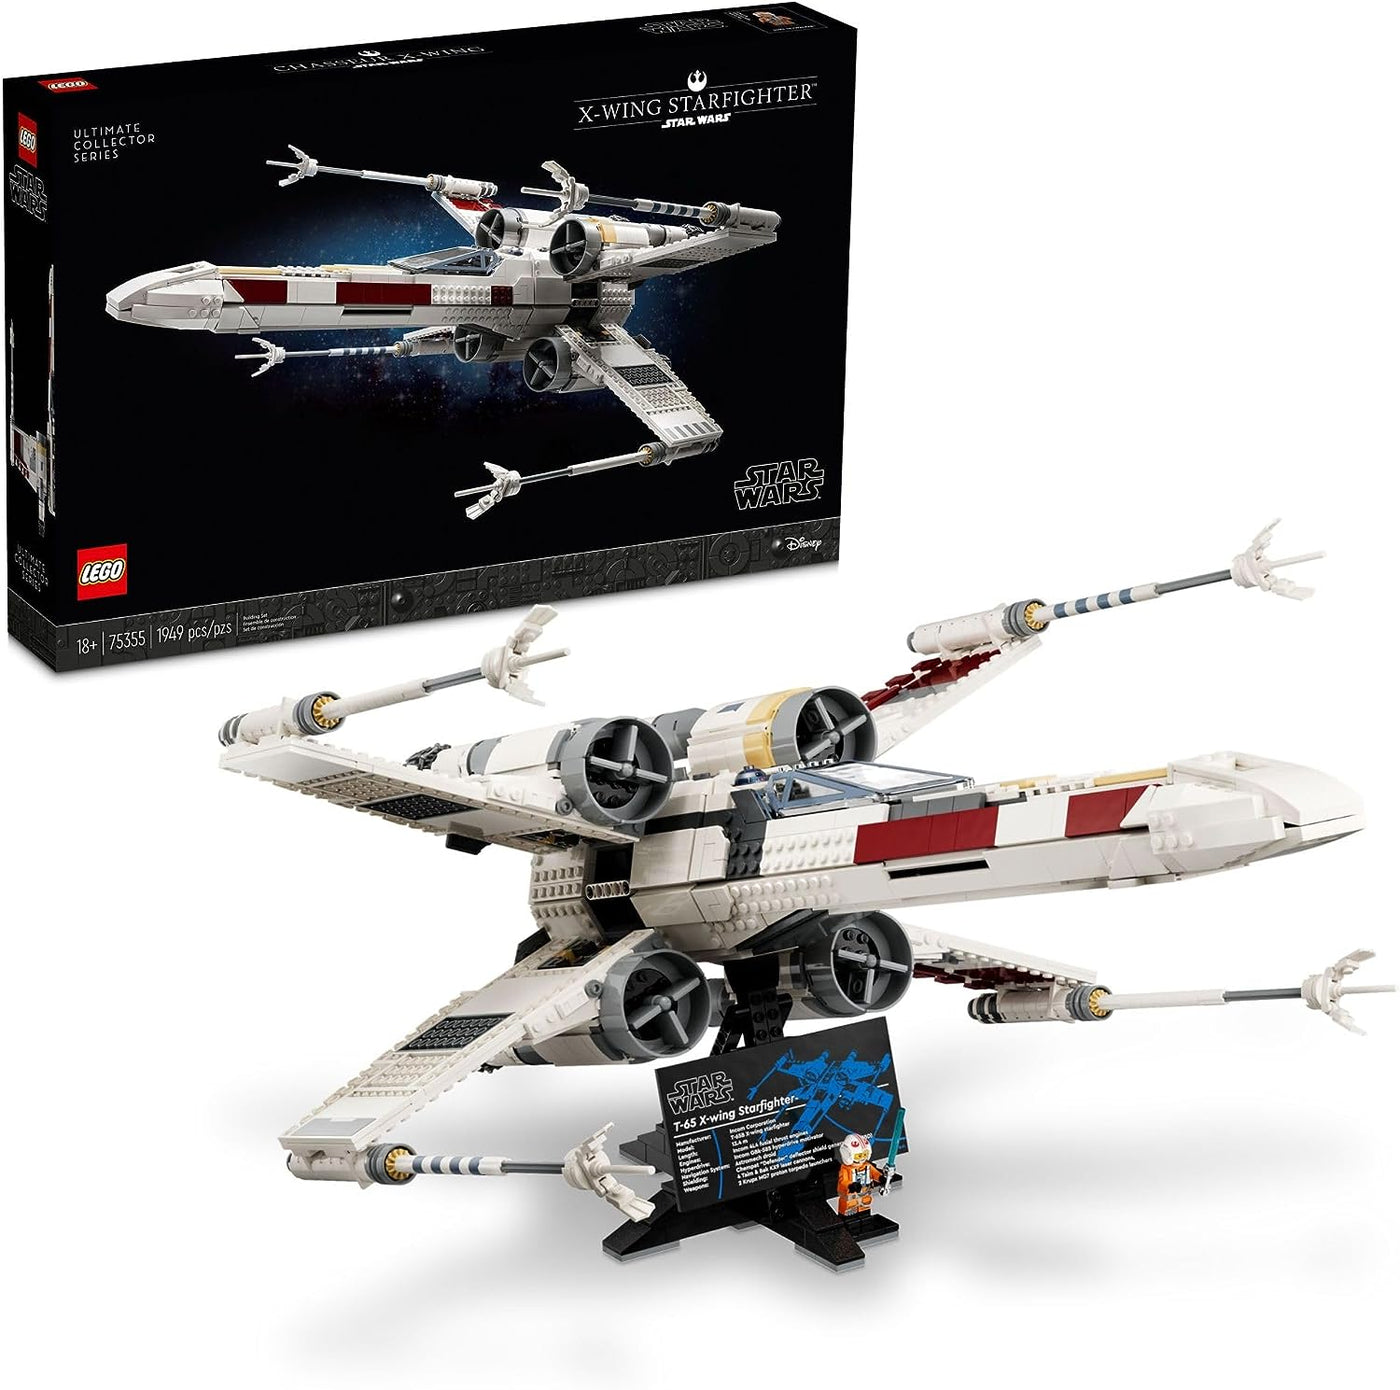 LEGO Star Wars Ultimate Collector Series X-Wing Starfighter 75355 Building Set - $180